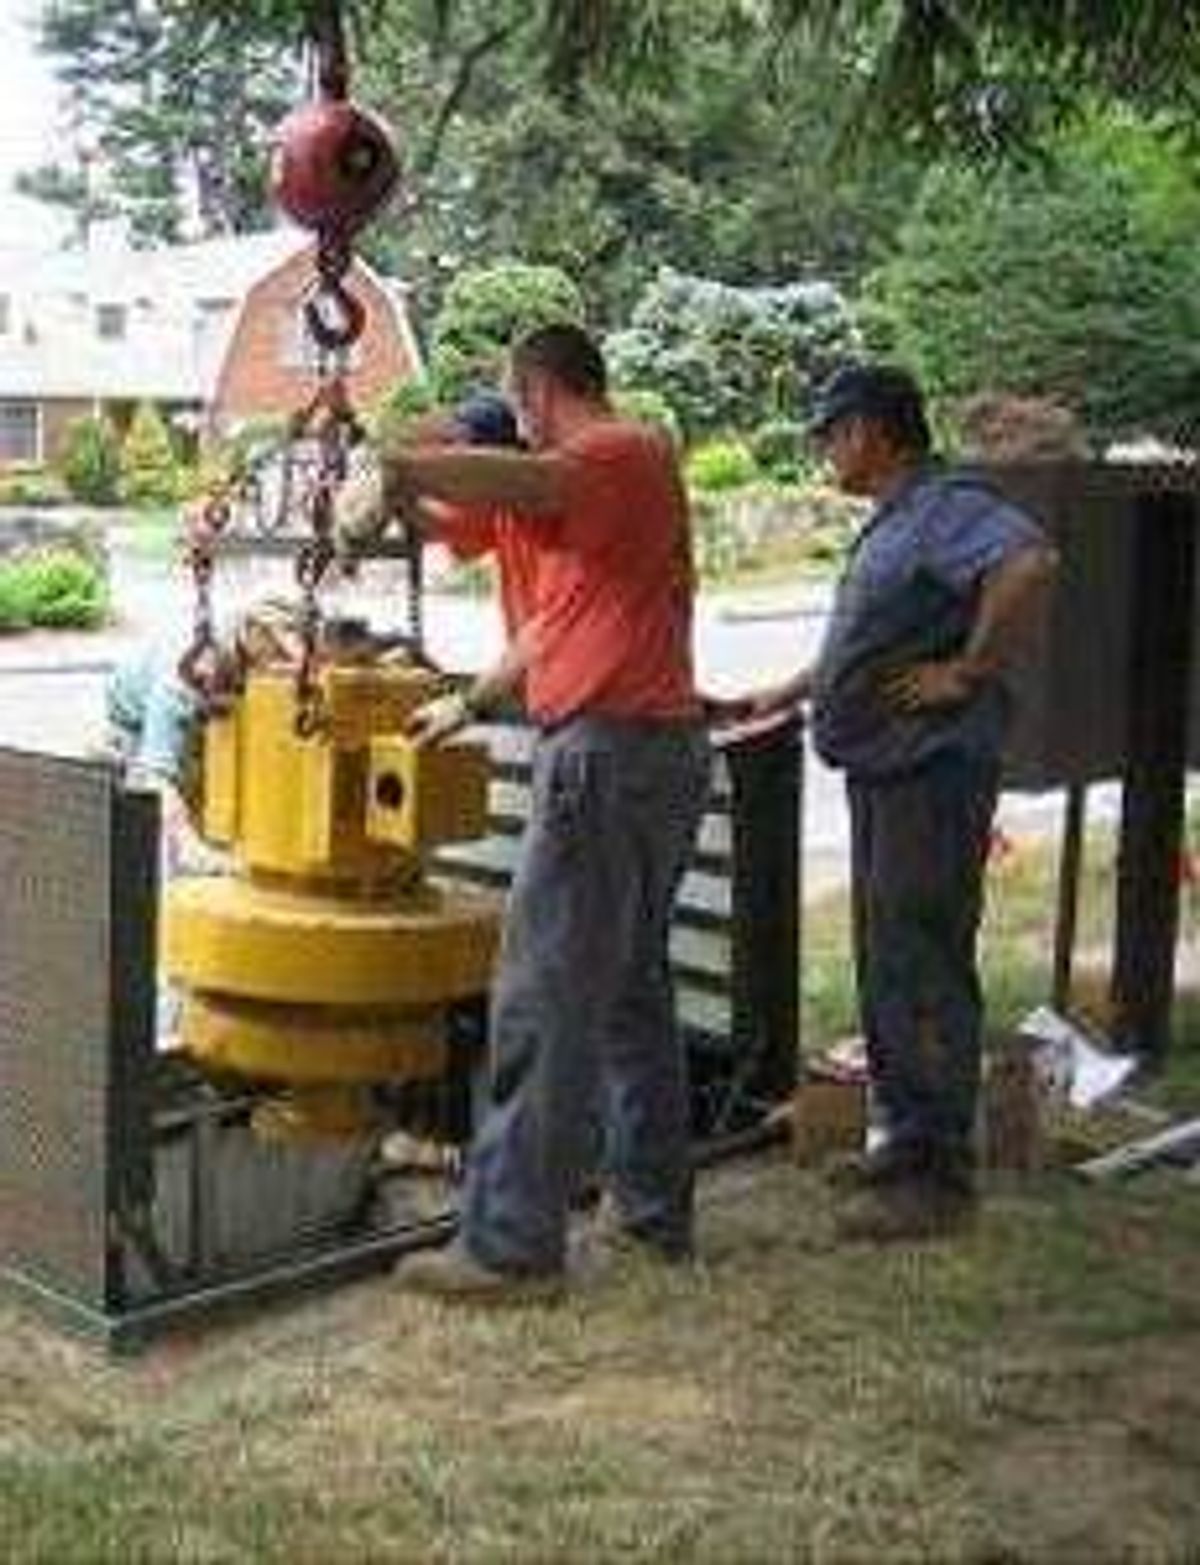 New York City to Explore Electricity from Water Mains